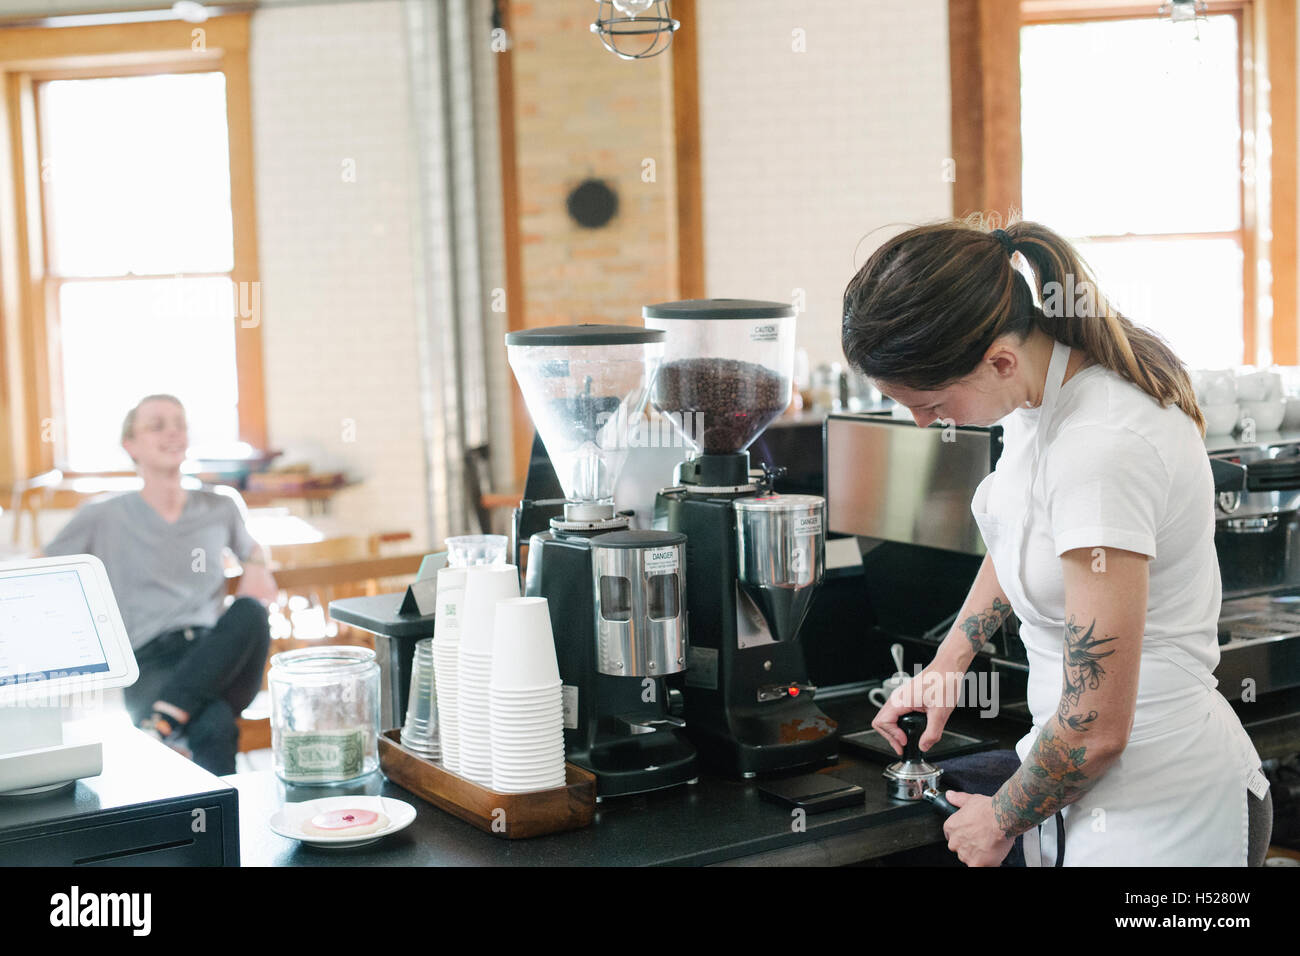 Woman wearing a white apron, in front of espresso machine, holding a portafilter. Stock Photo